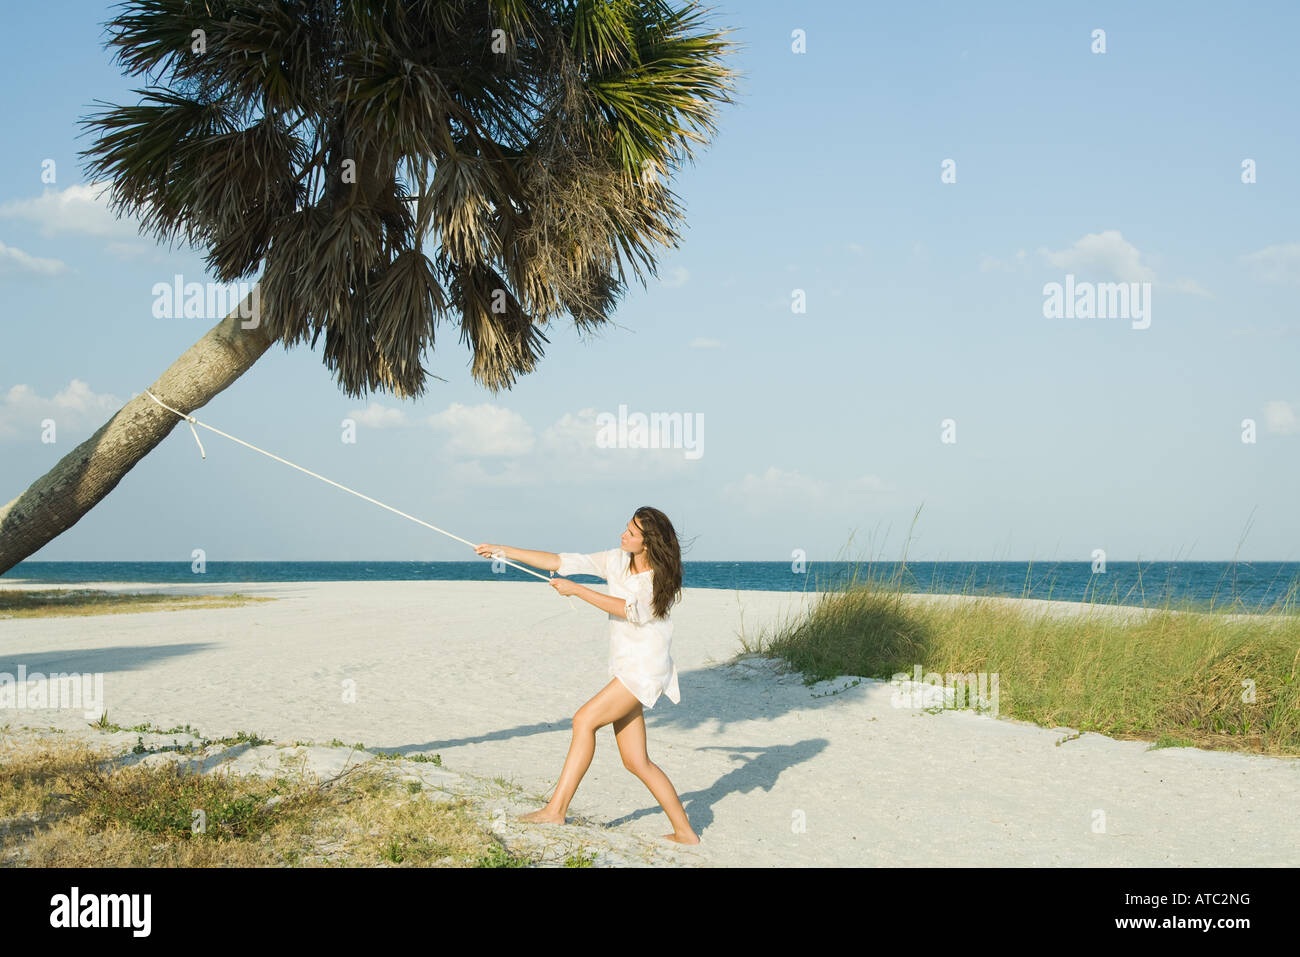 Woman pulling palm tree with rope Stock Photo - Alamy